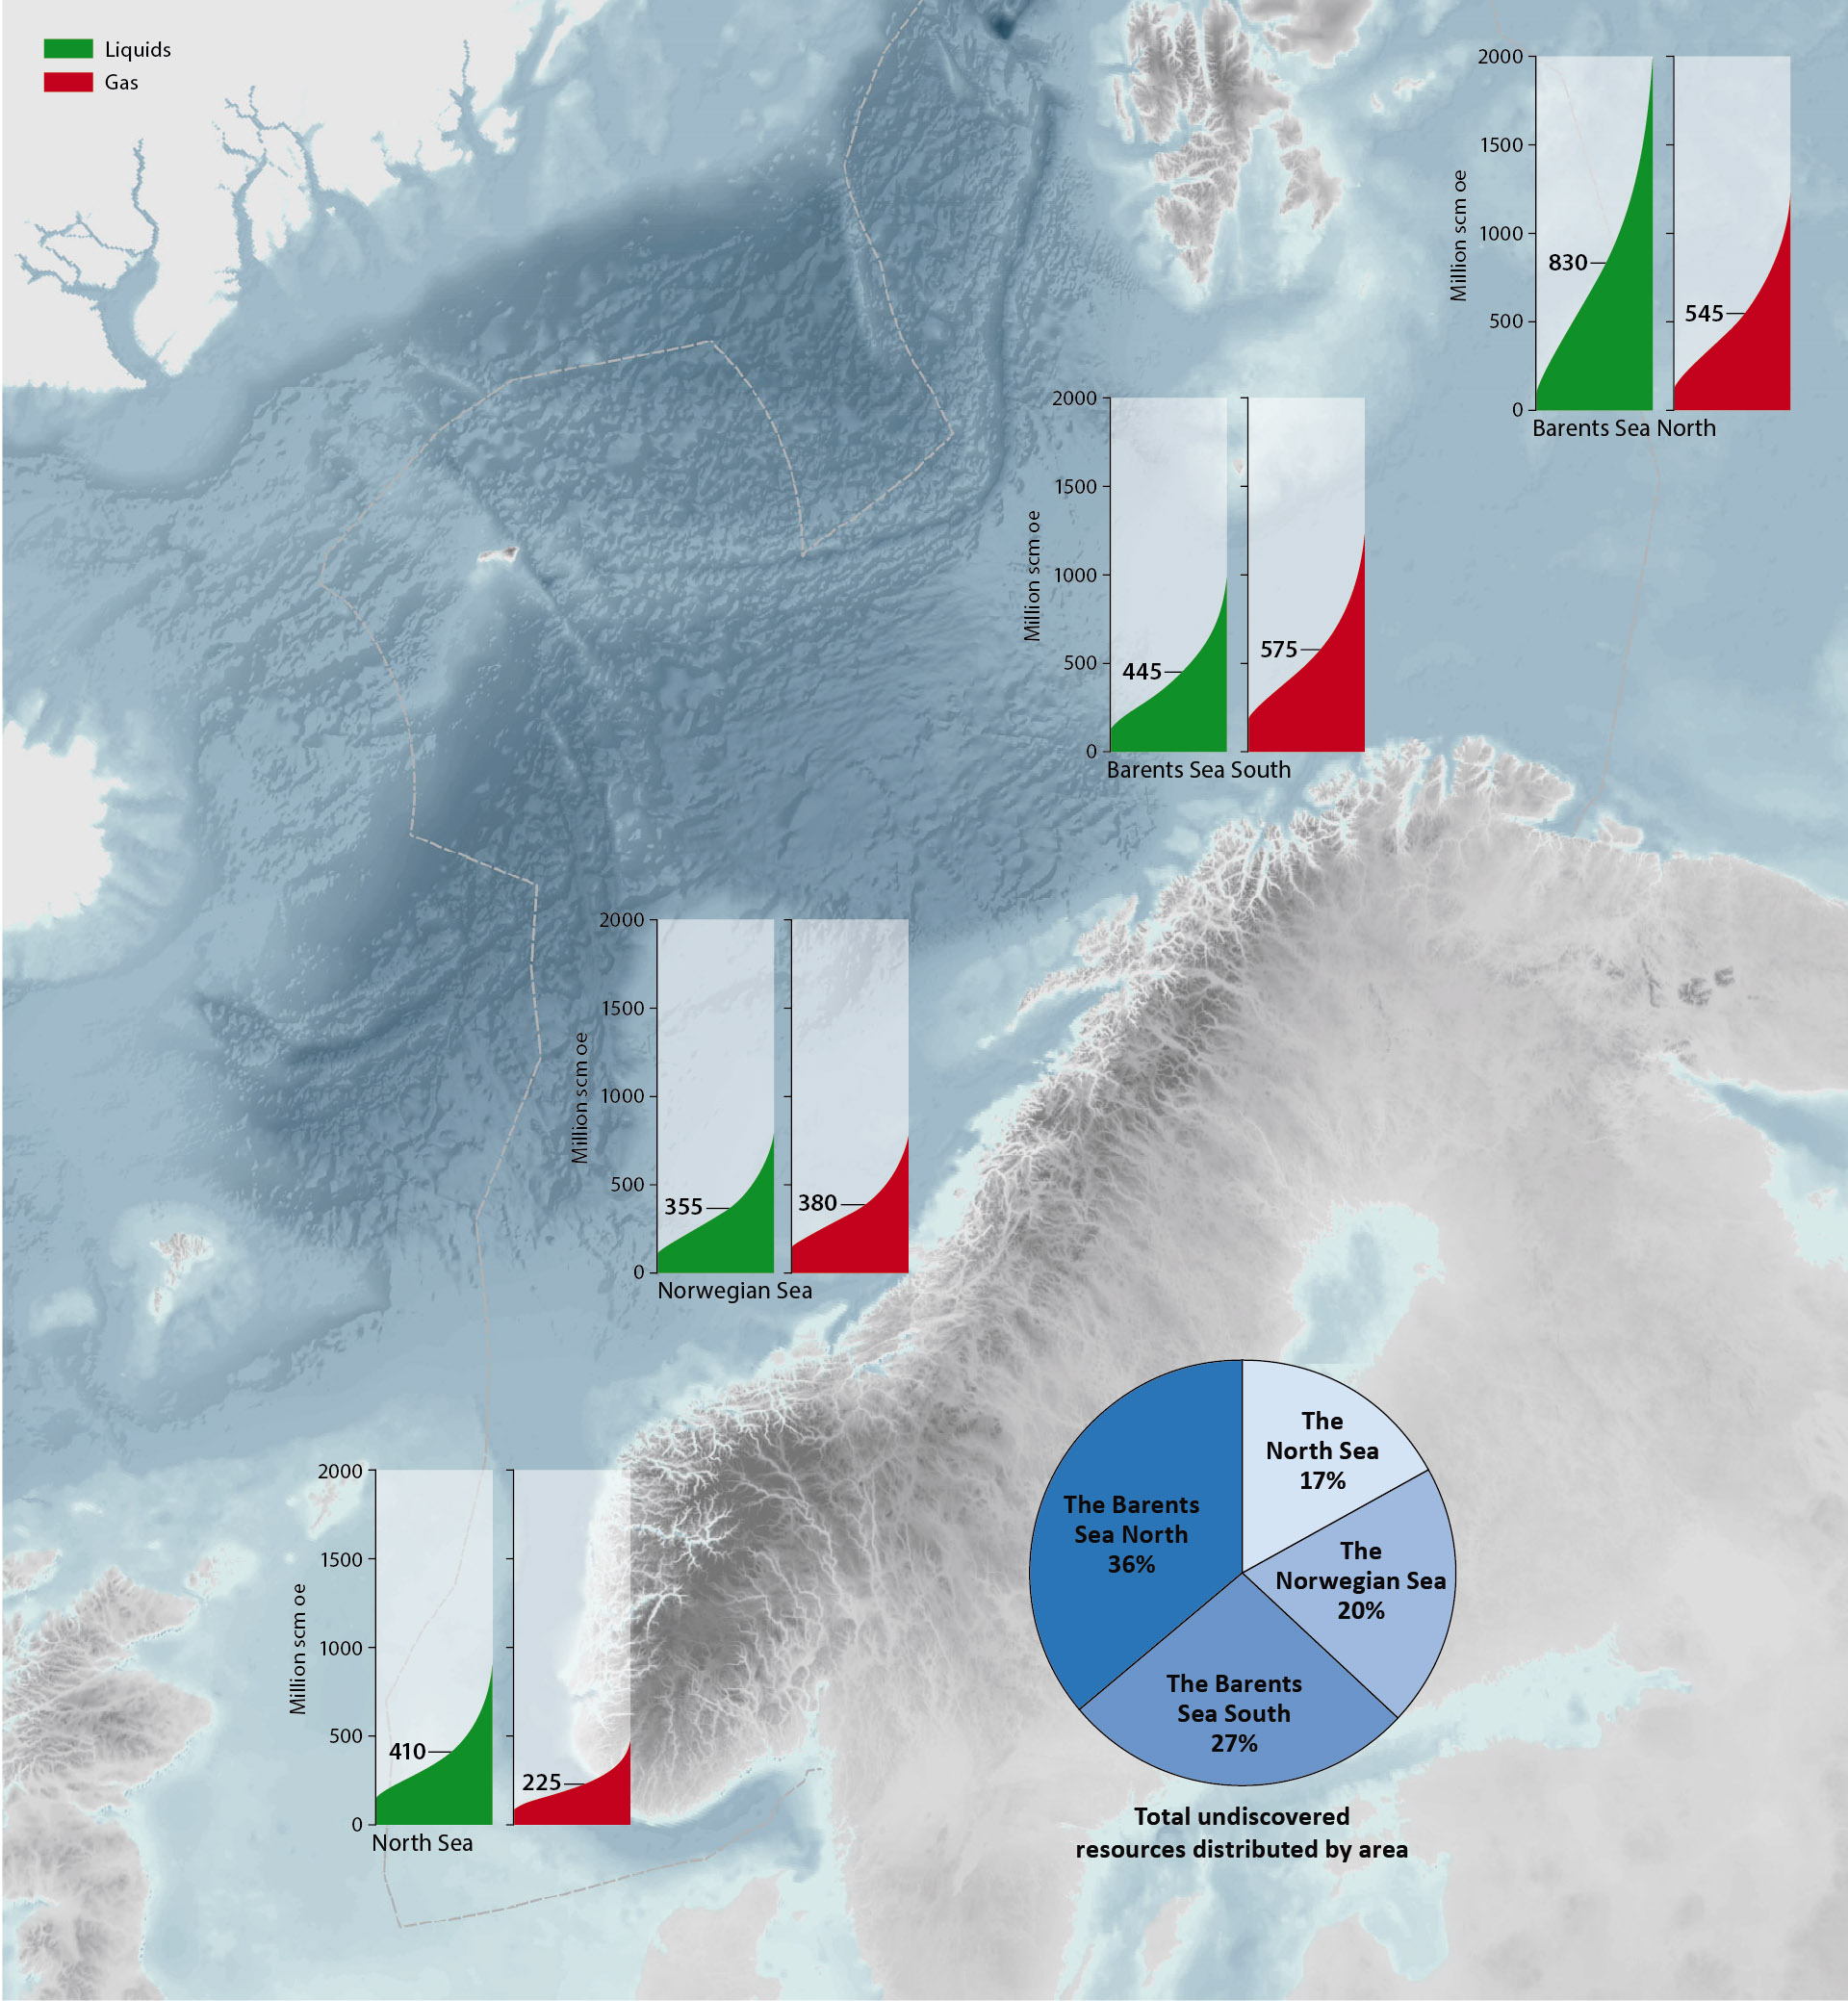 the ilustration shows the distribution of undiscovered liquids and gas in the various sea areas with range of uncertainty, everthing on a map of the Norwegian Contintal Shelf